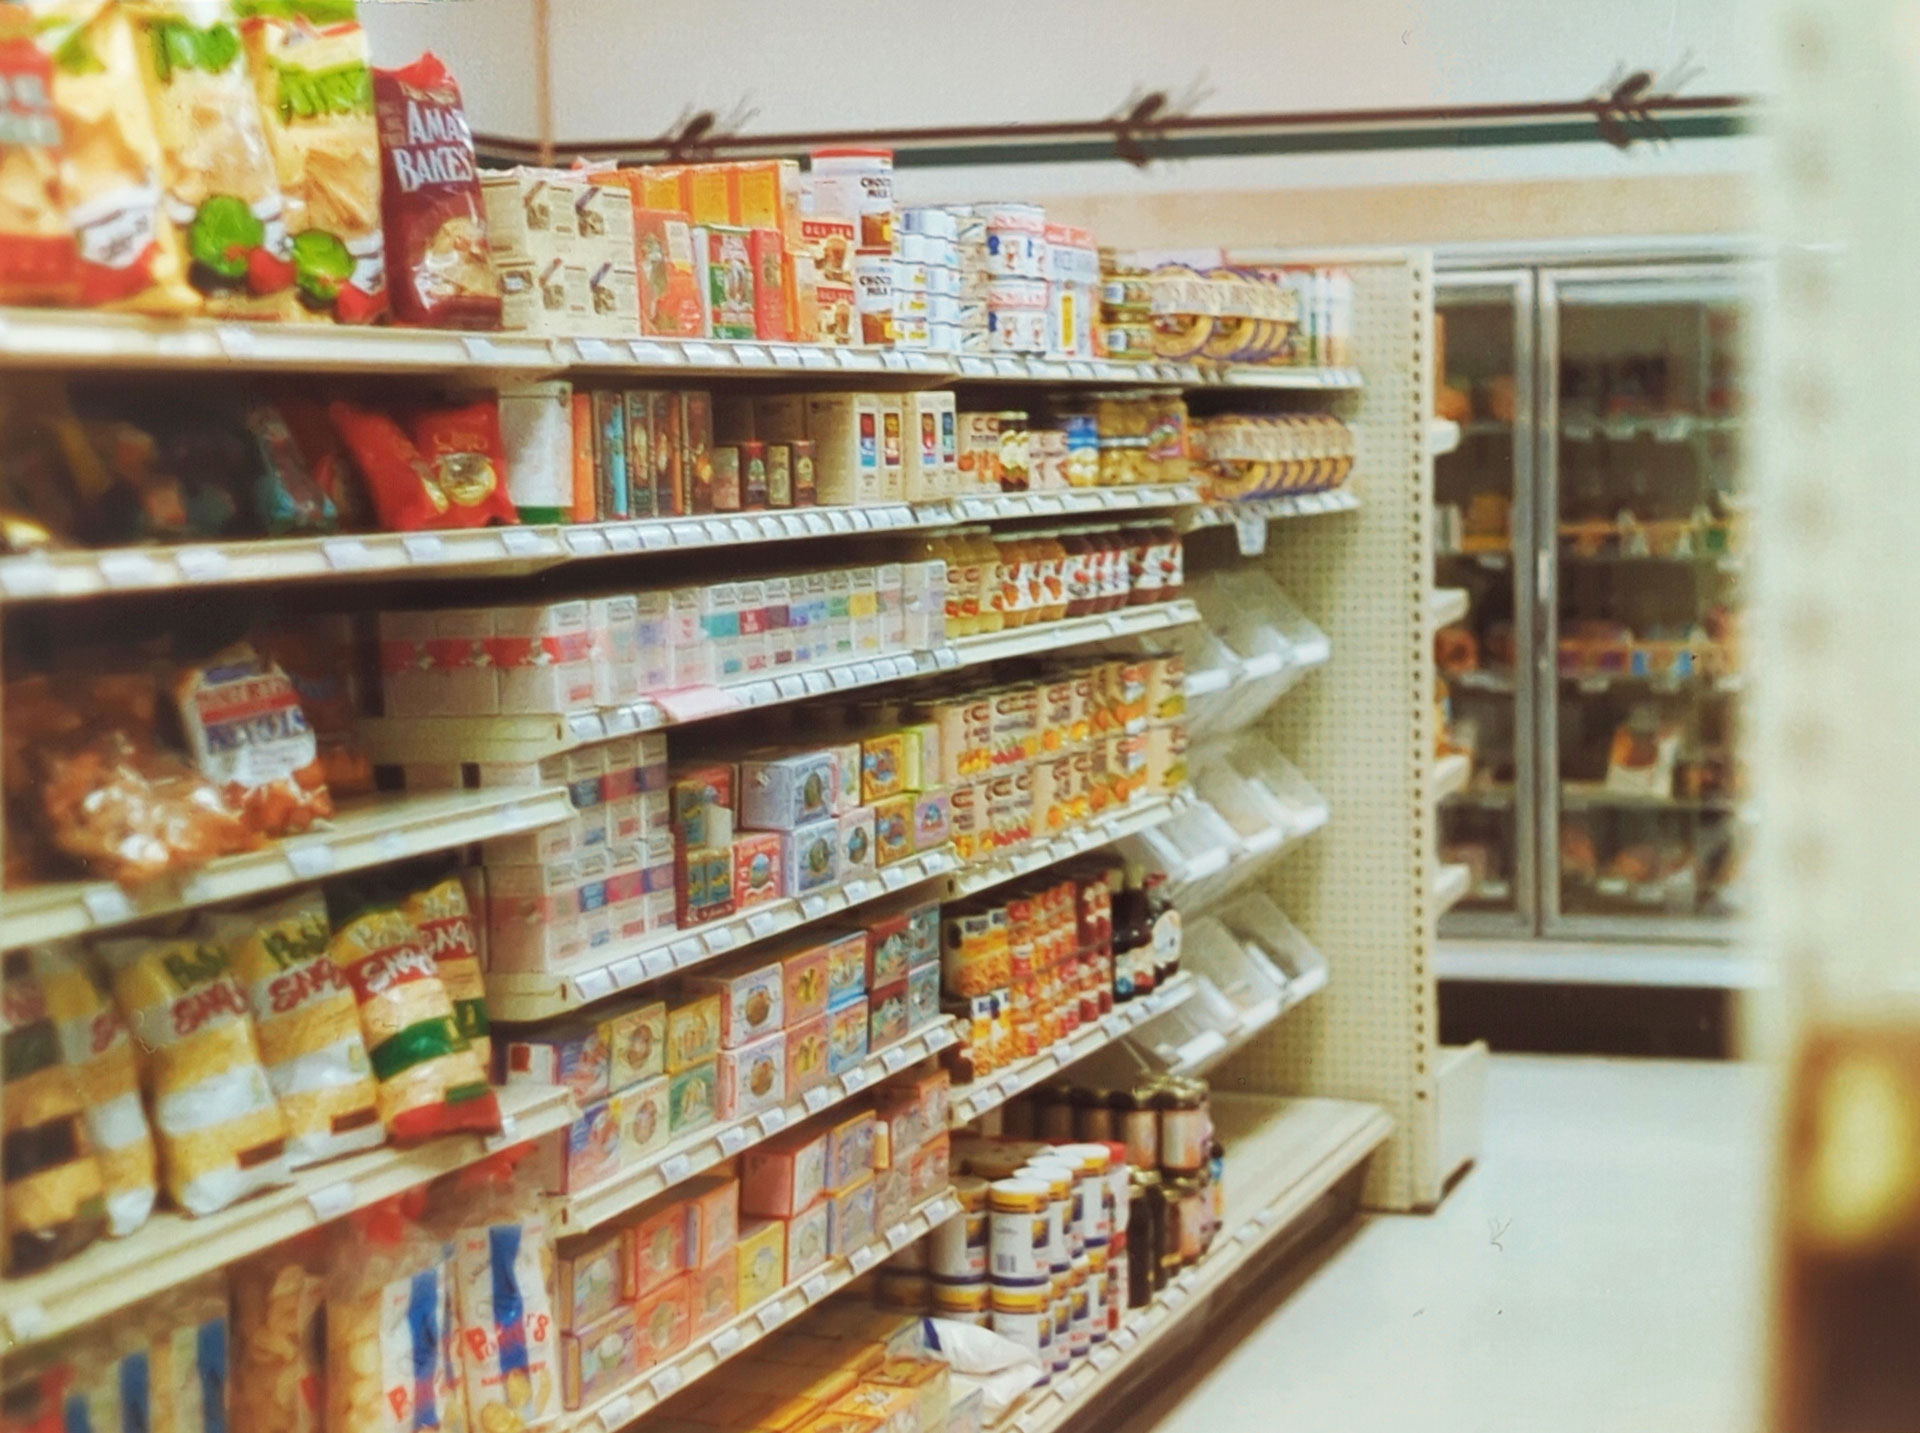 A grocery store aisle with shelves stocked with various packaged foods and snacks. The left side has chips and snack bags, while the middle shelves display cereal boxes and assorted food items. Refrigerated goods are visible in coolers on the right side, reminiscent of Whole Foods Coop Duluth MN.